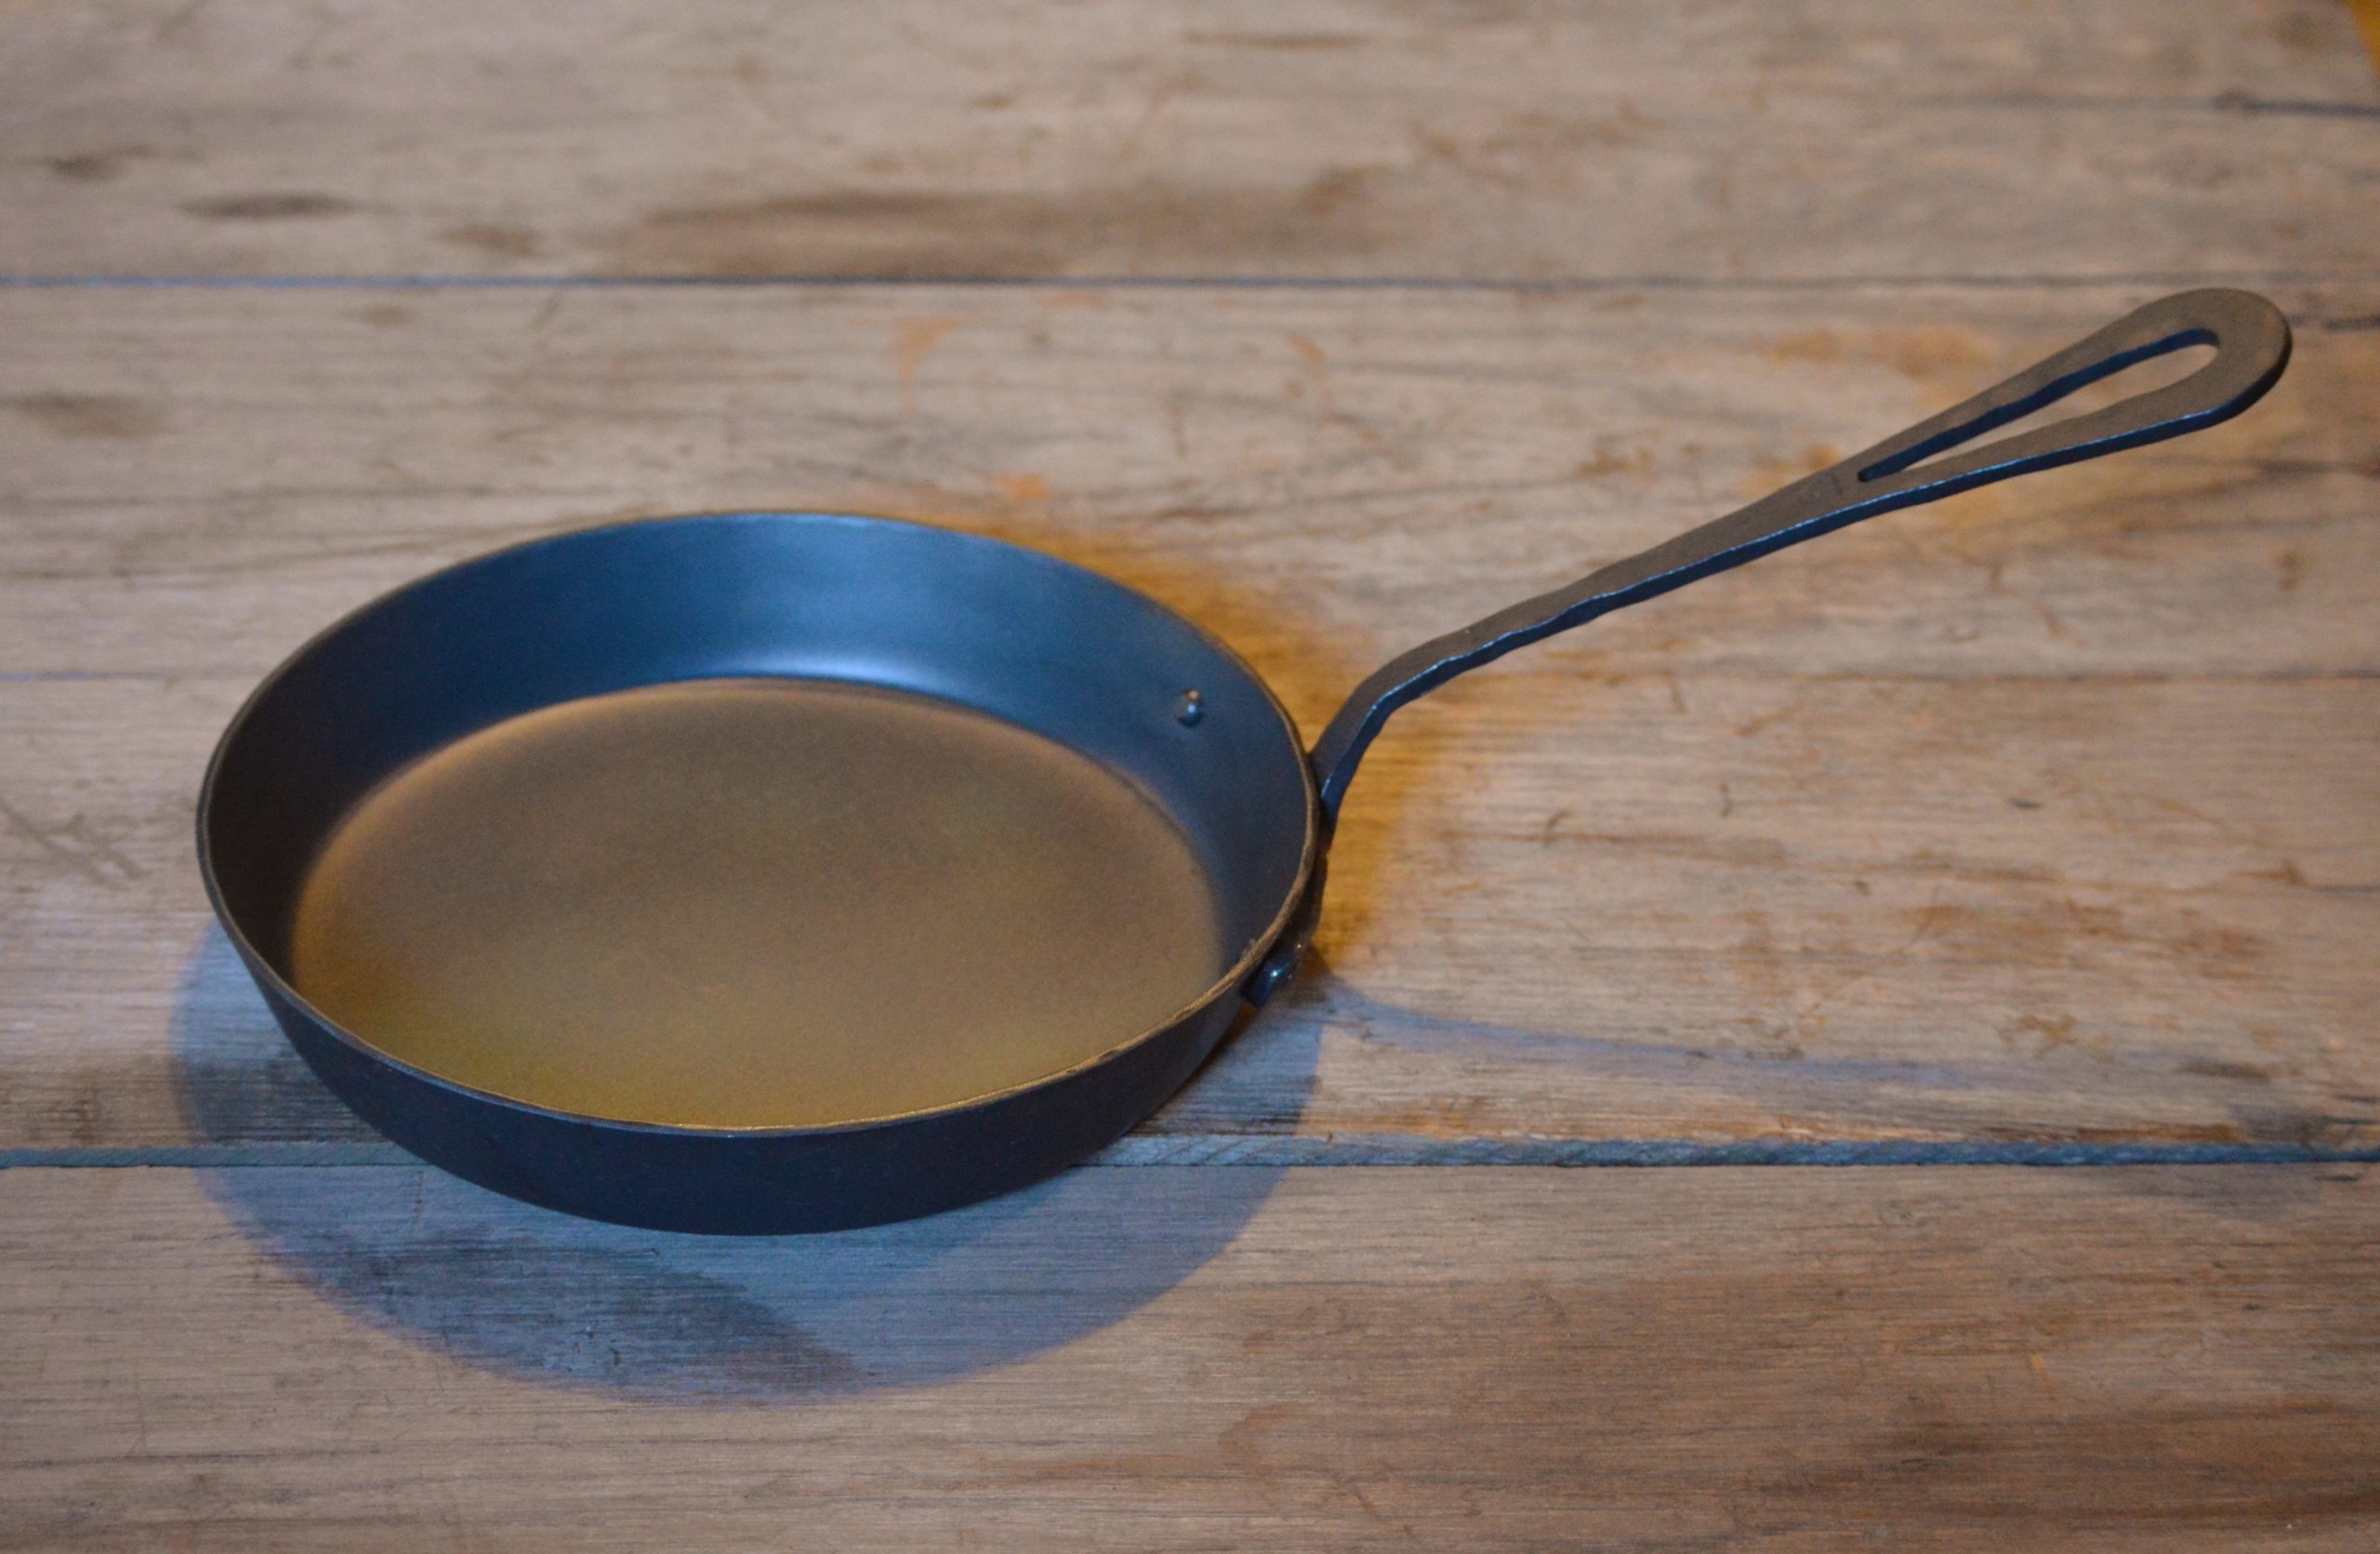 Why You Need an 8-Inch Skillet